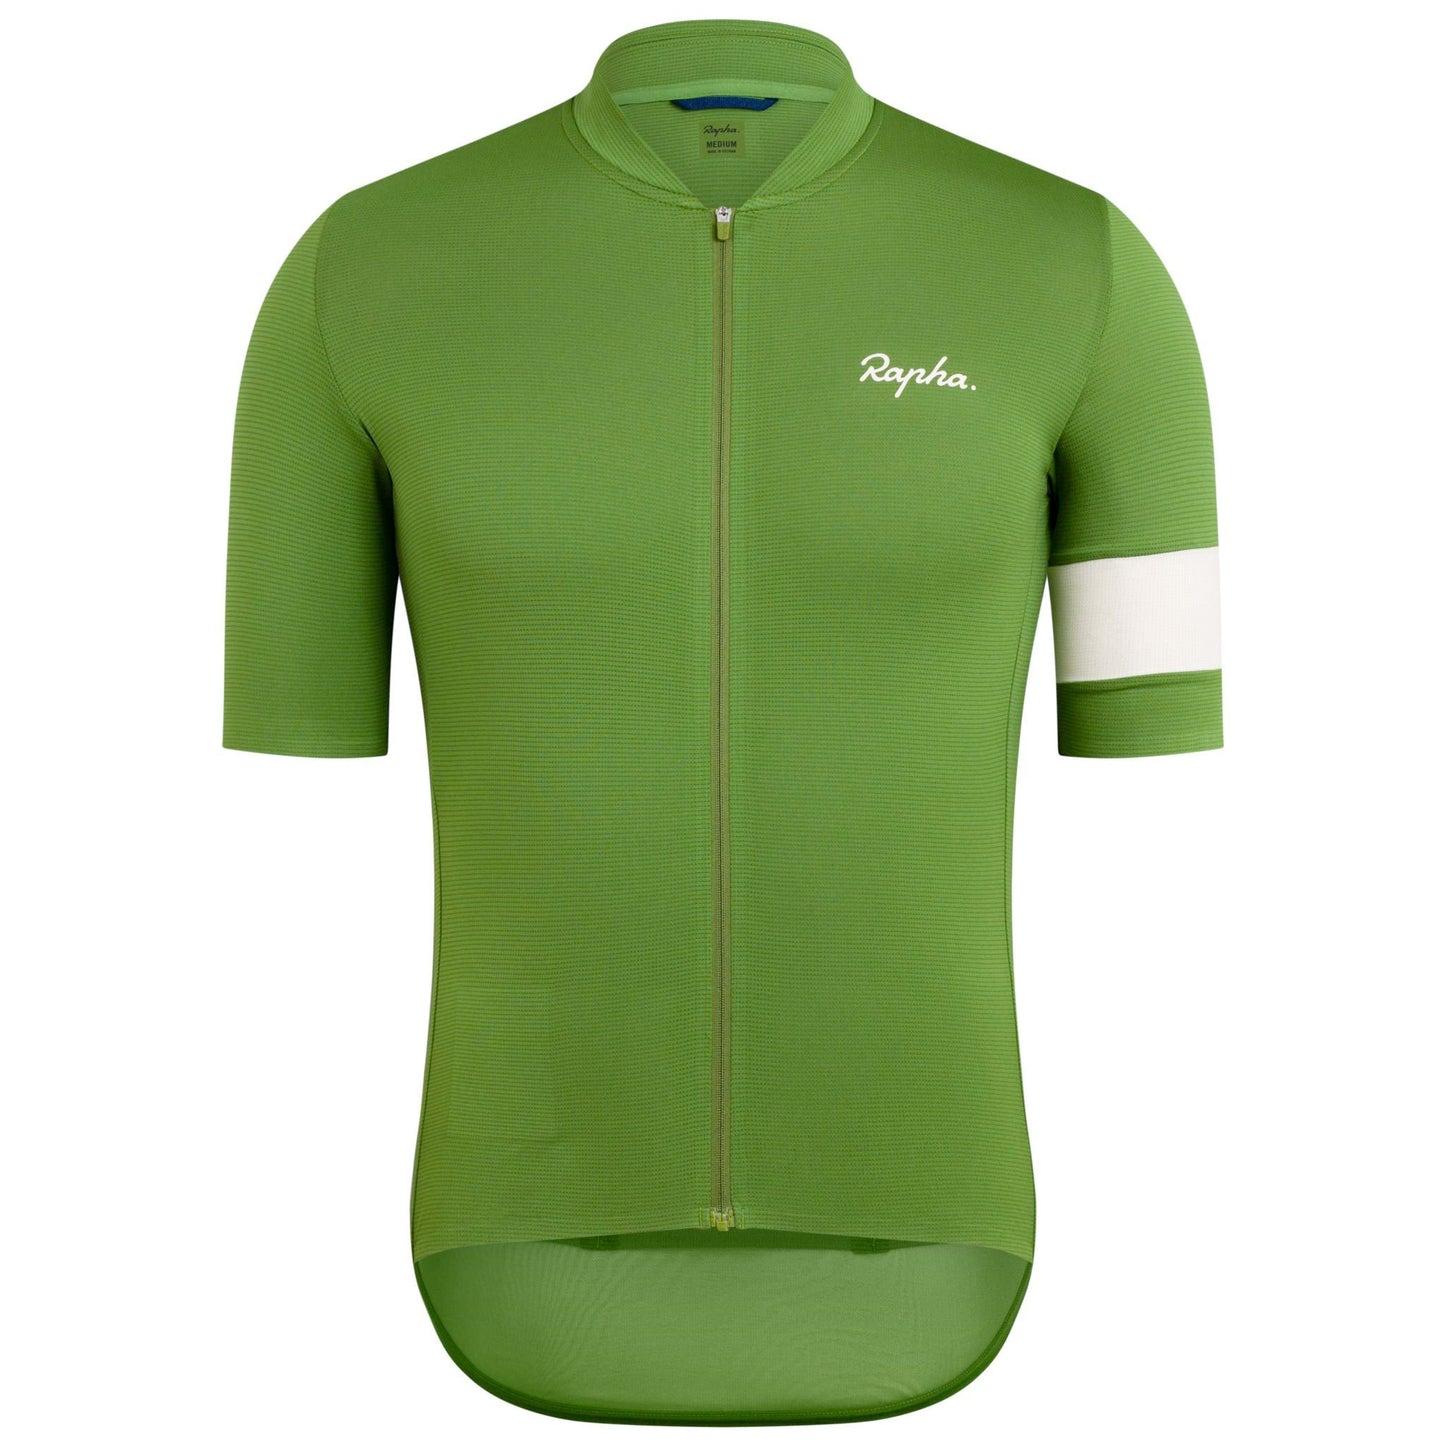 Rapha Mens Classic Flyweight Jersey, Green buy online with free delivery from Woolysd Wheels